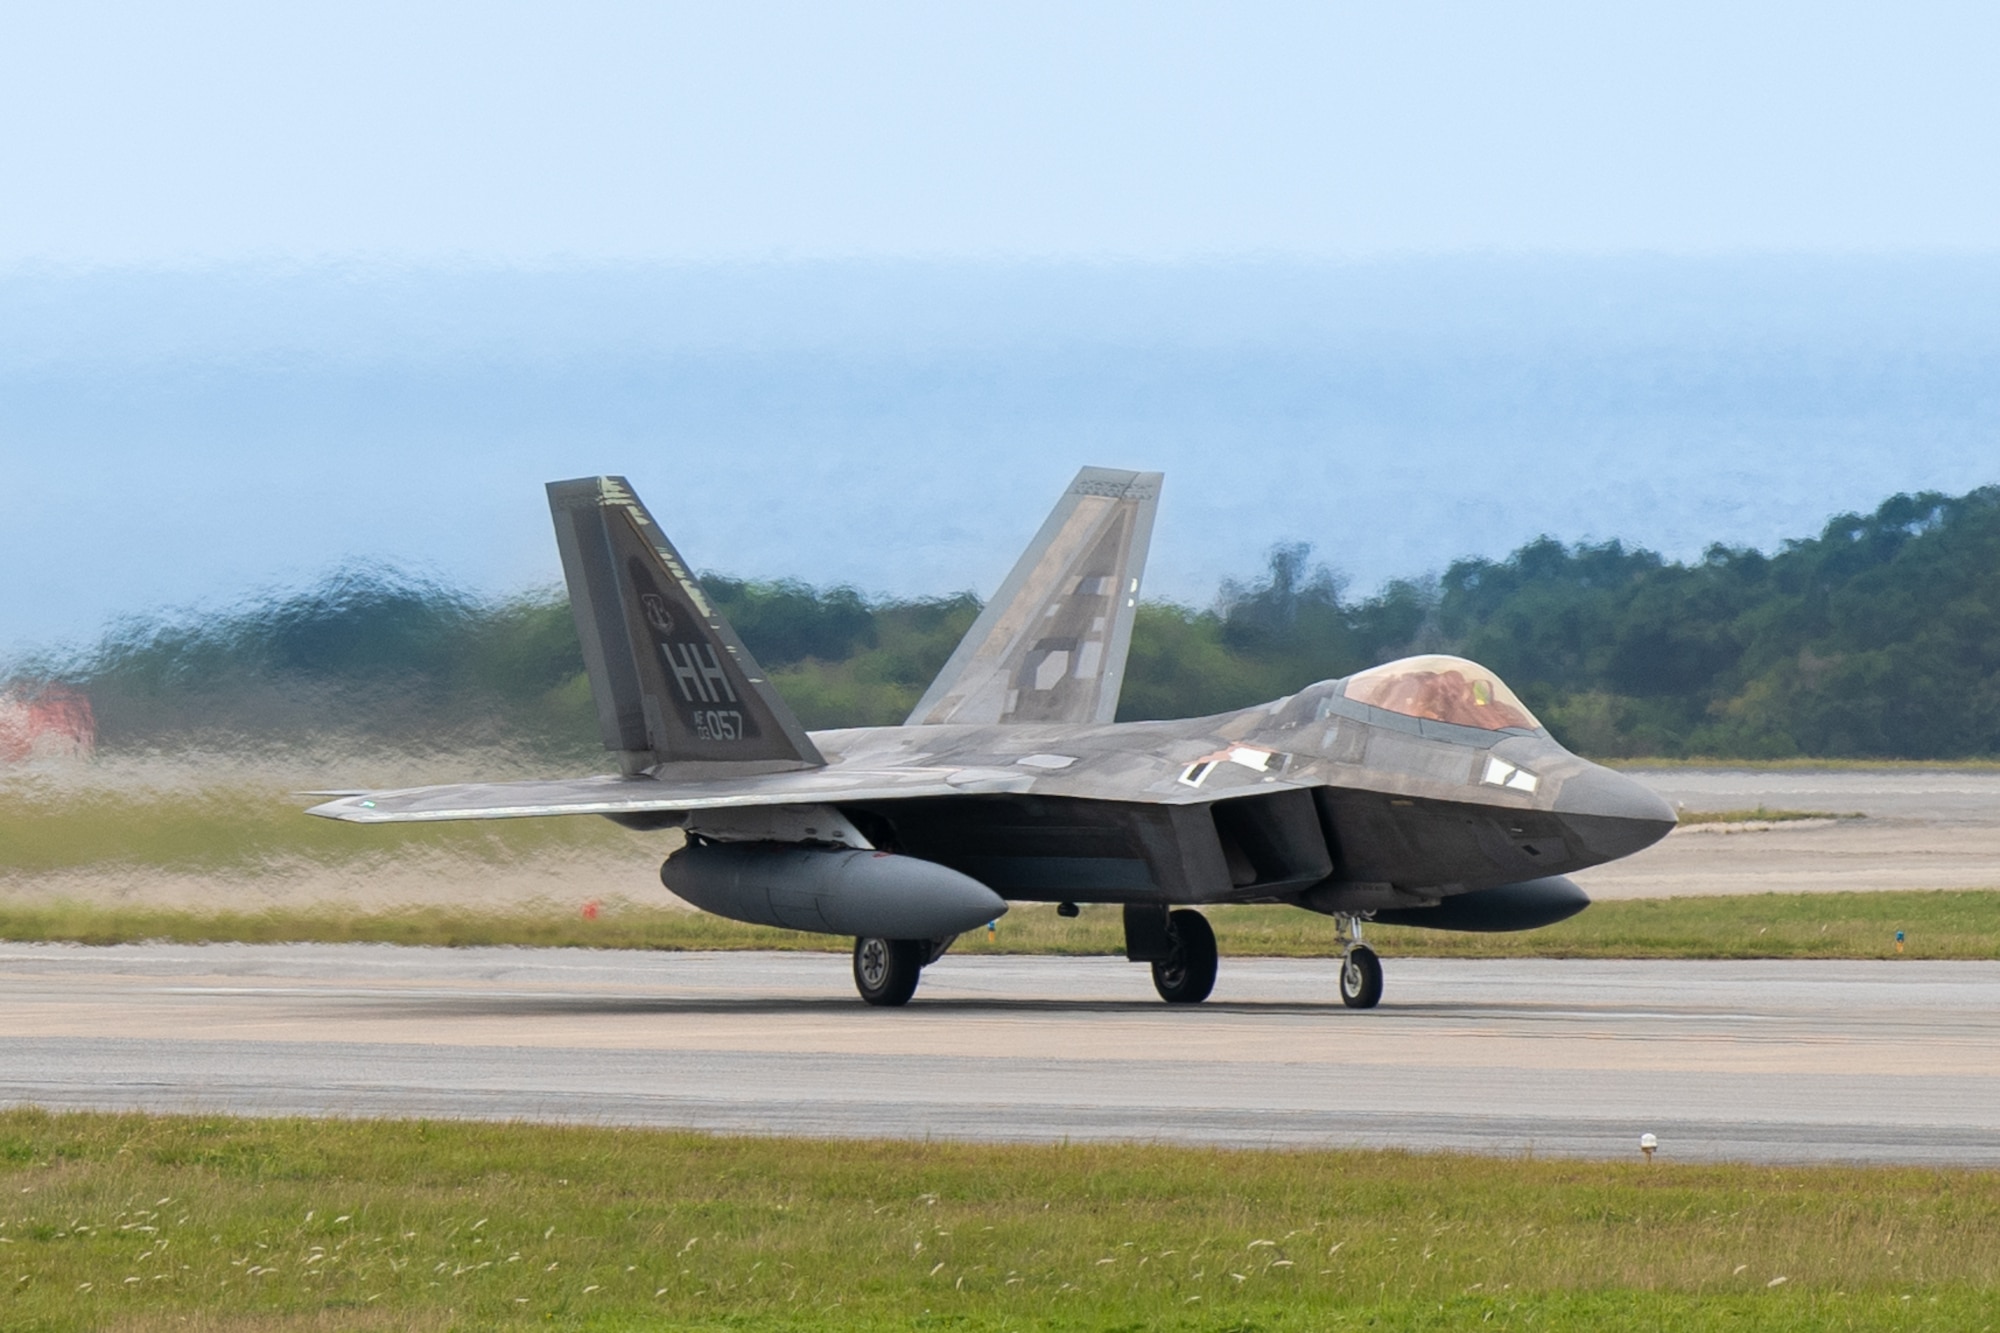 A U.S. Air Force F-22A Raptor, operated by the 199th and 19th Fighter Squadrons, lands at Kadena Air Base.